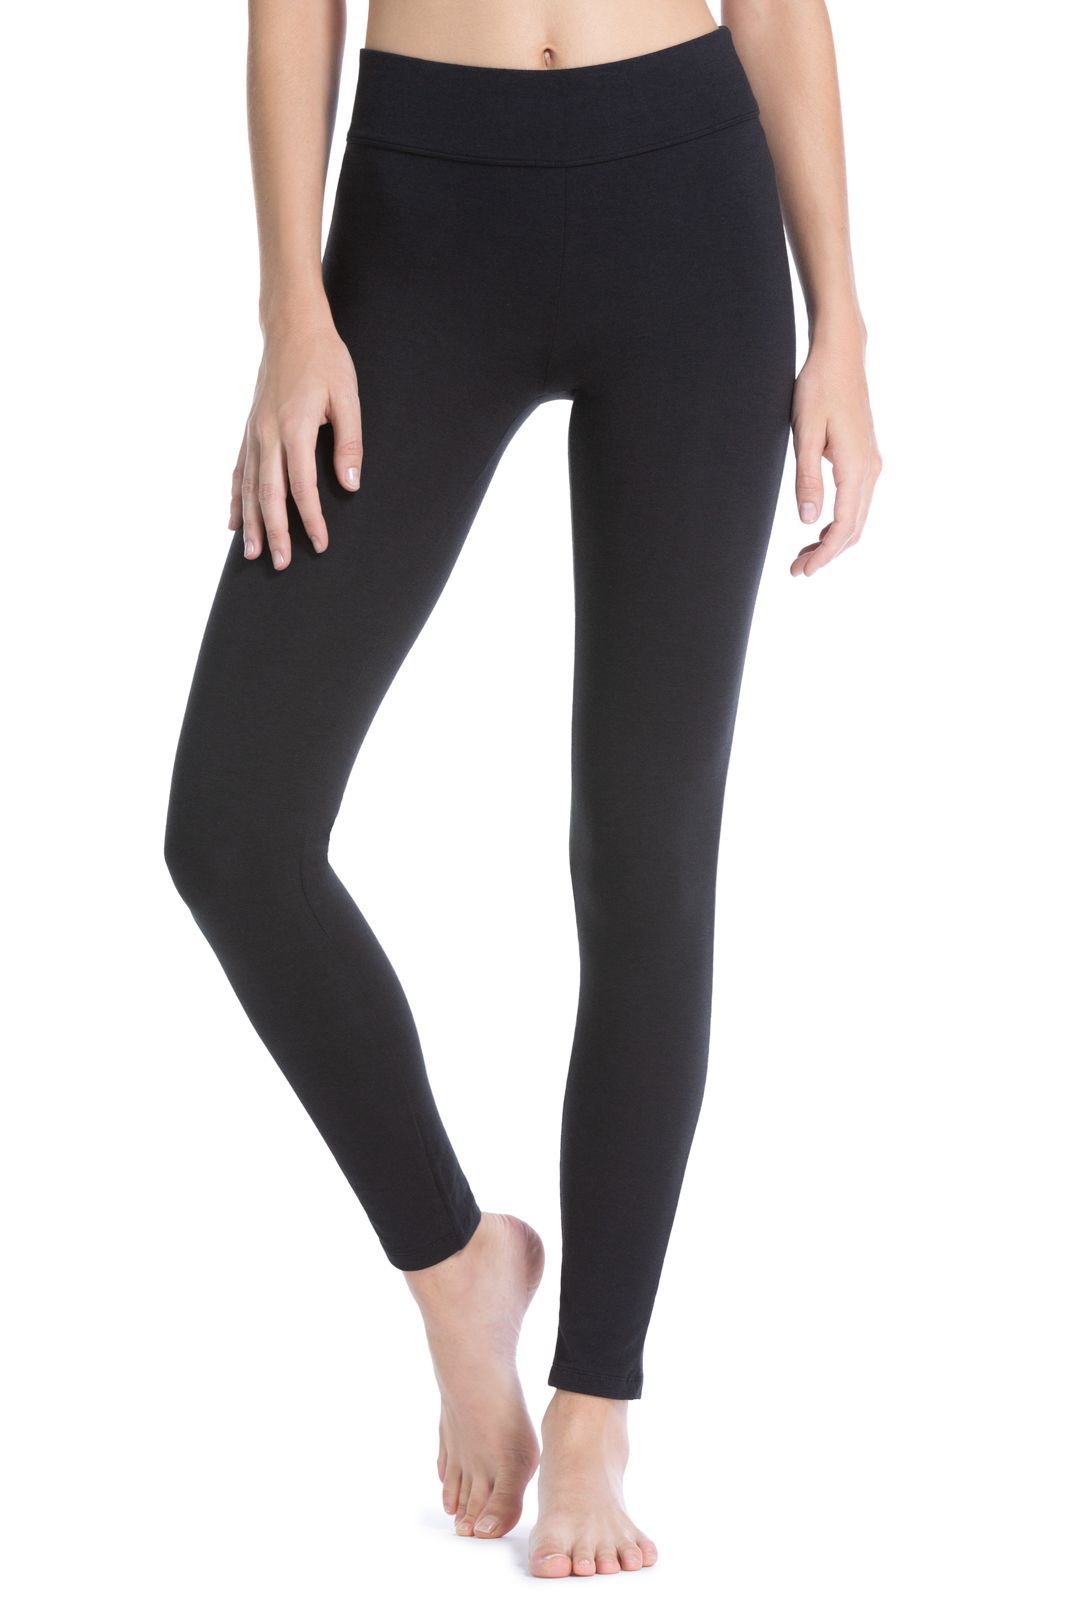 Ankle Length Leggings Suppliers 17137312 - Wholesale Manufacturers and  Exporters